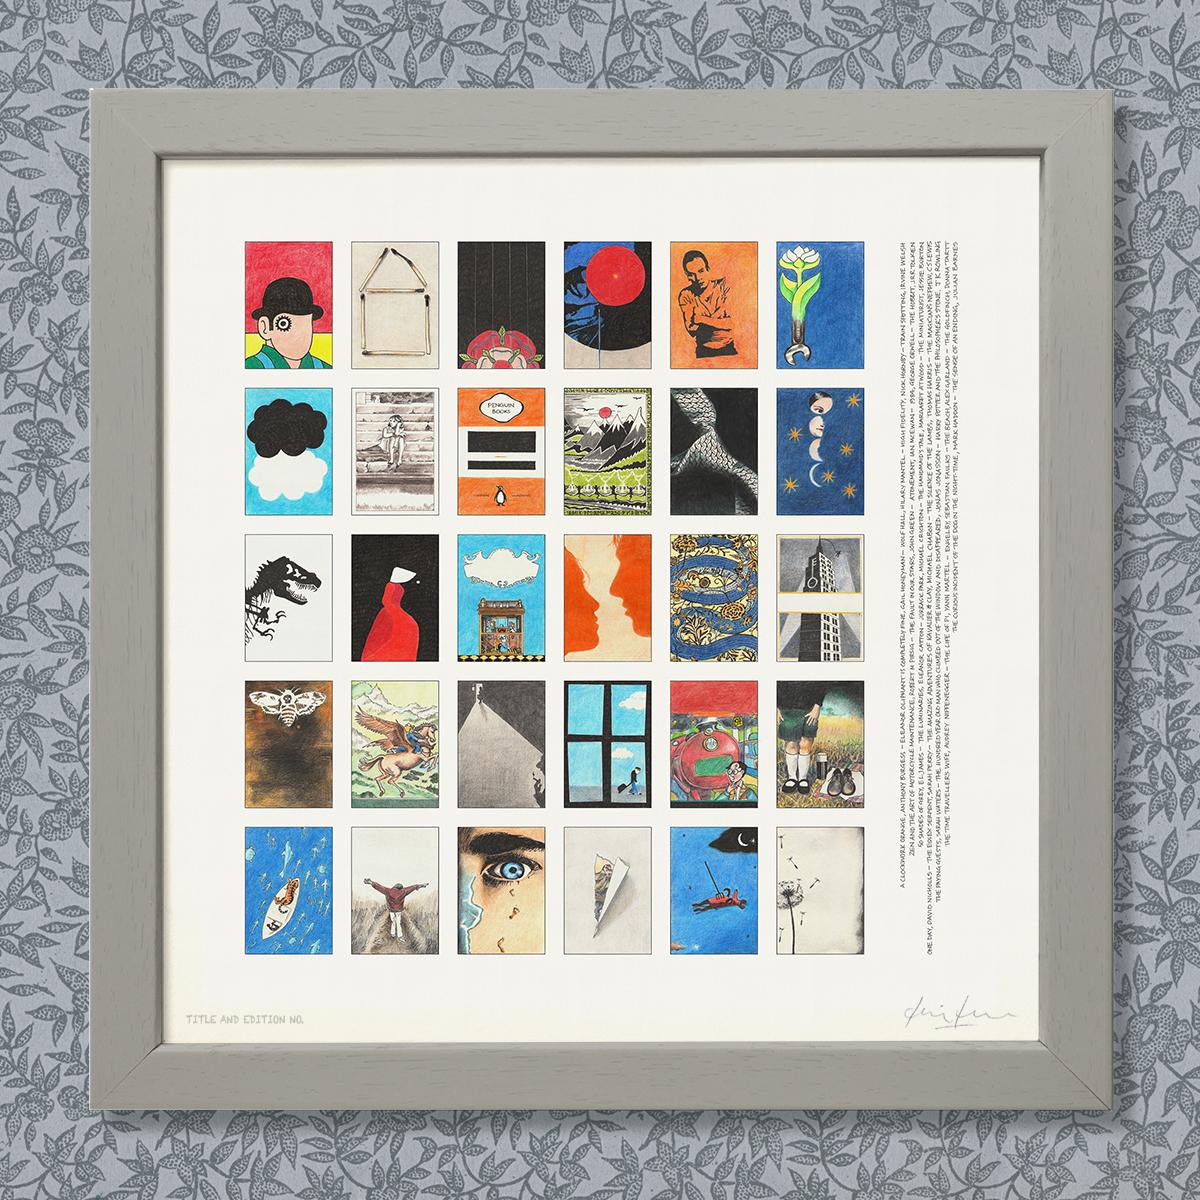 Limited edition montage print of book covers in a grey frame.